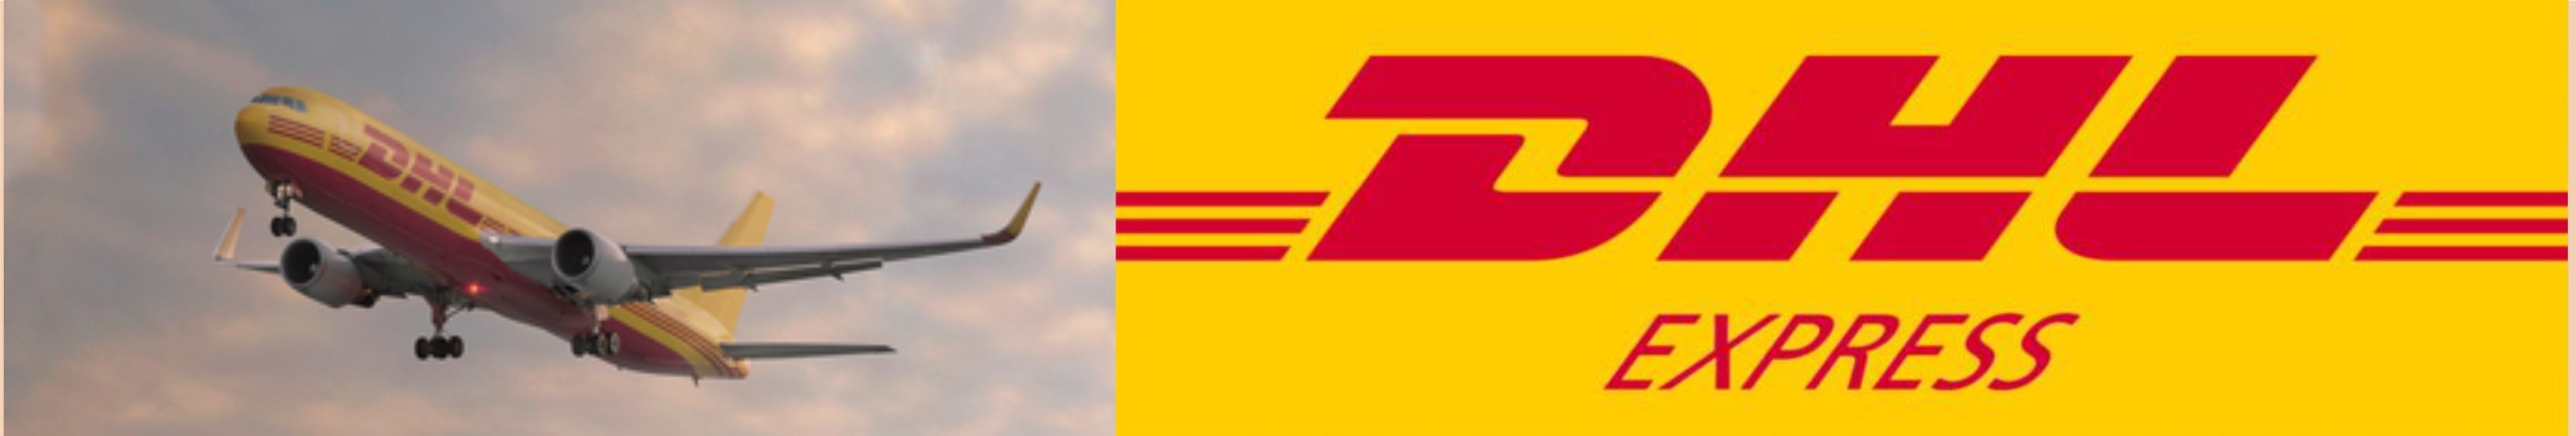 dhl-express-on-demand-delivery-eng-01